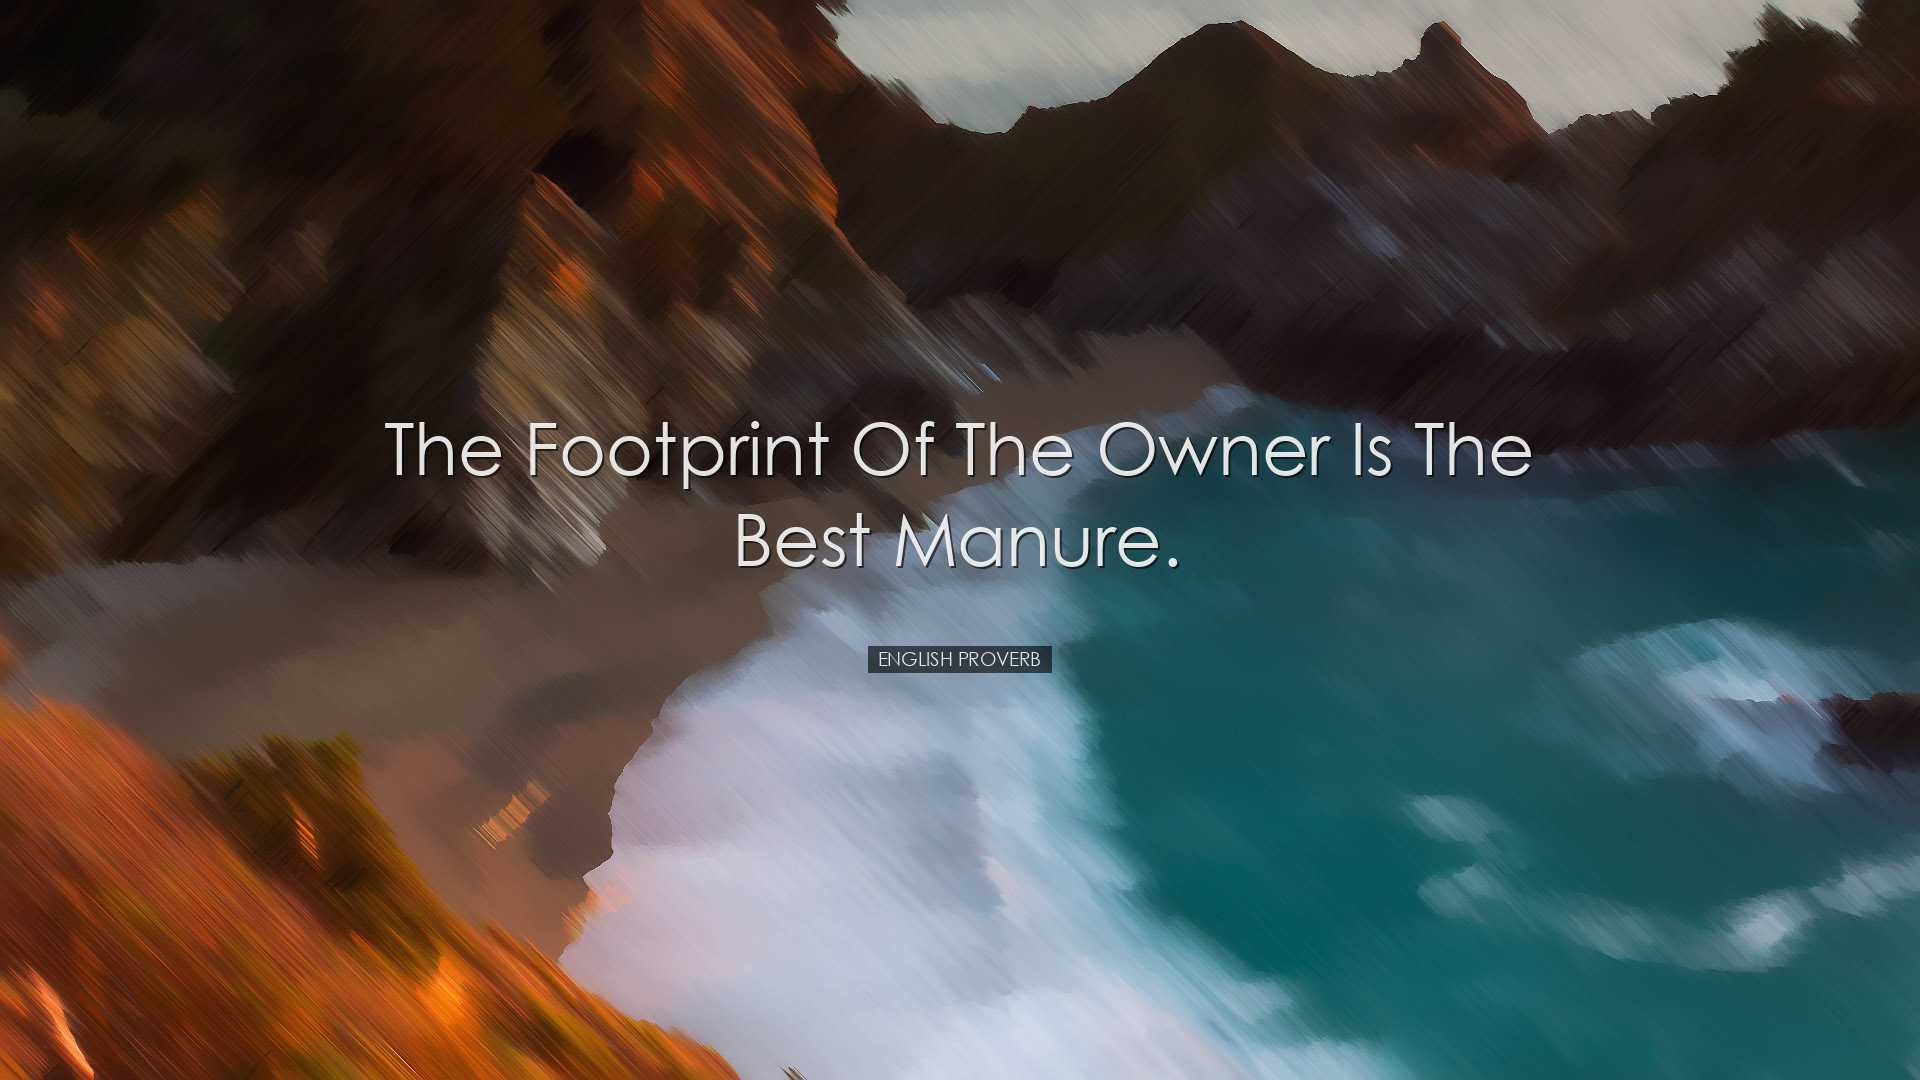 The footprint of the owner is the best manure. - English Proverb